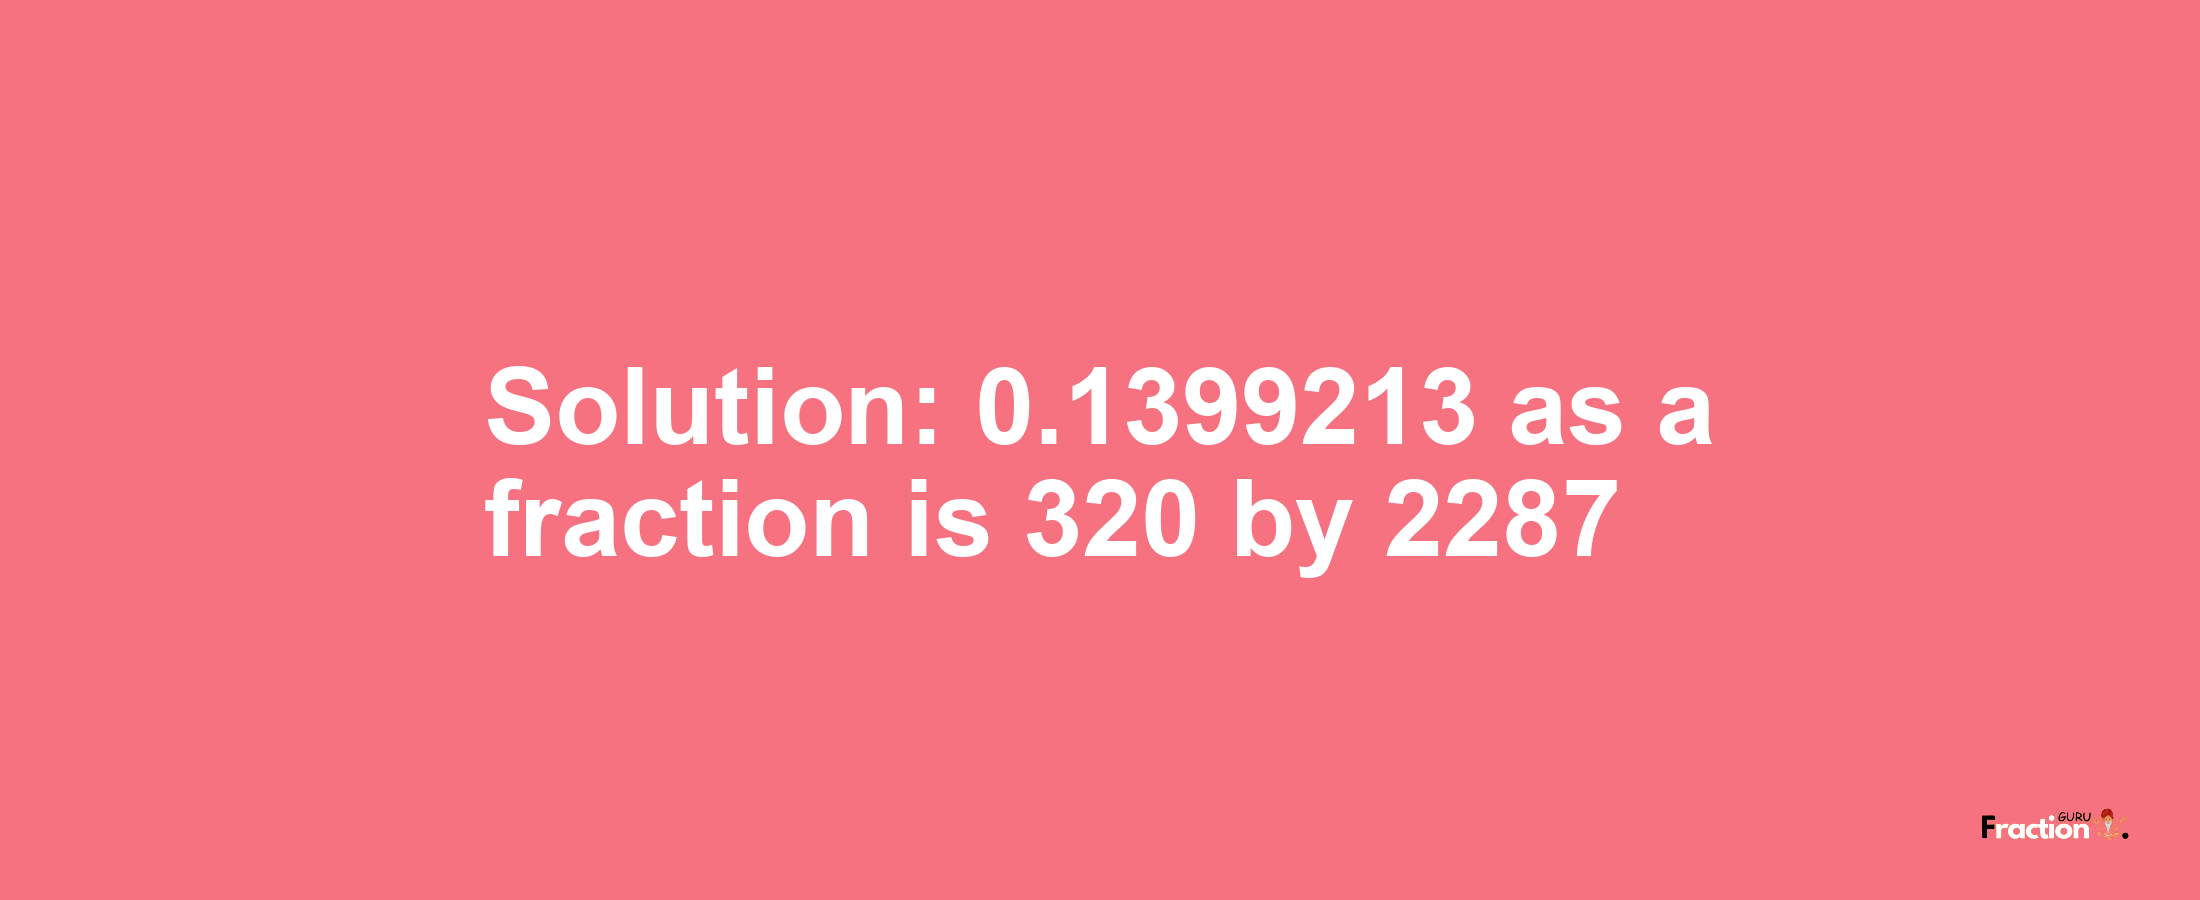 Solution:0.1399213 as a fraction is 320/2287